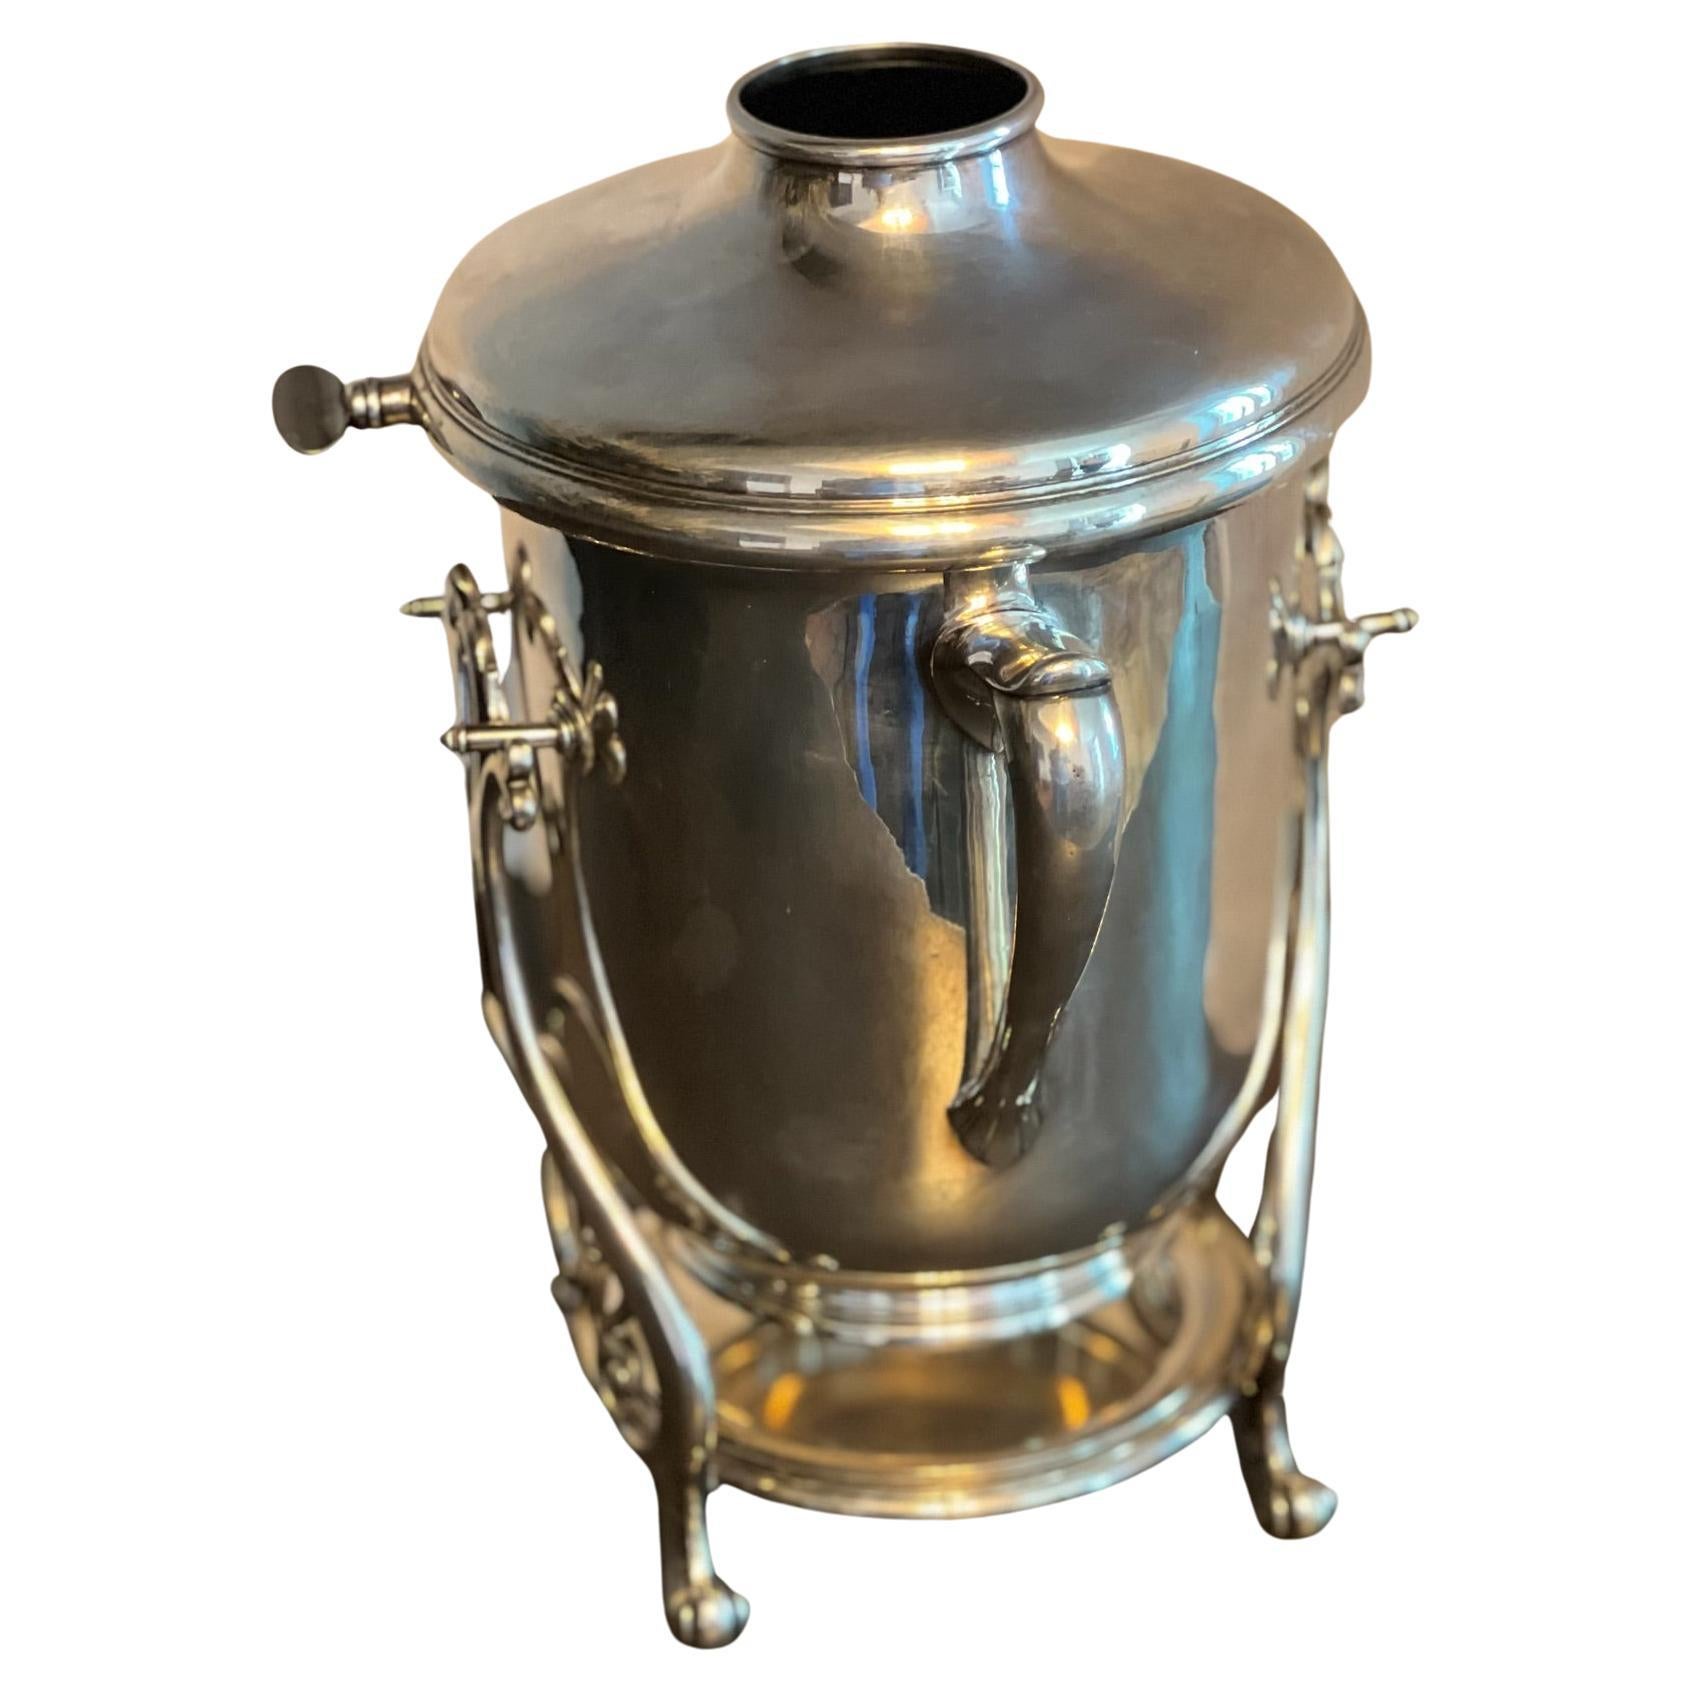 Christofle silver-plated champagne or wine cooler and bucket, circa 1935. 
In very good condition, it has all these items with their hallmarks. 
The bucket tilts to pour wine or champagne. 

This piece is in excellent condition. 

Hauteur : 31 cm